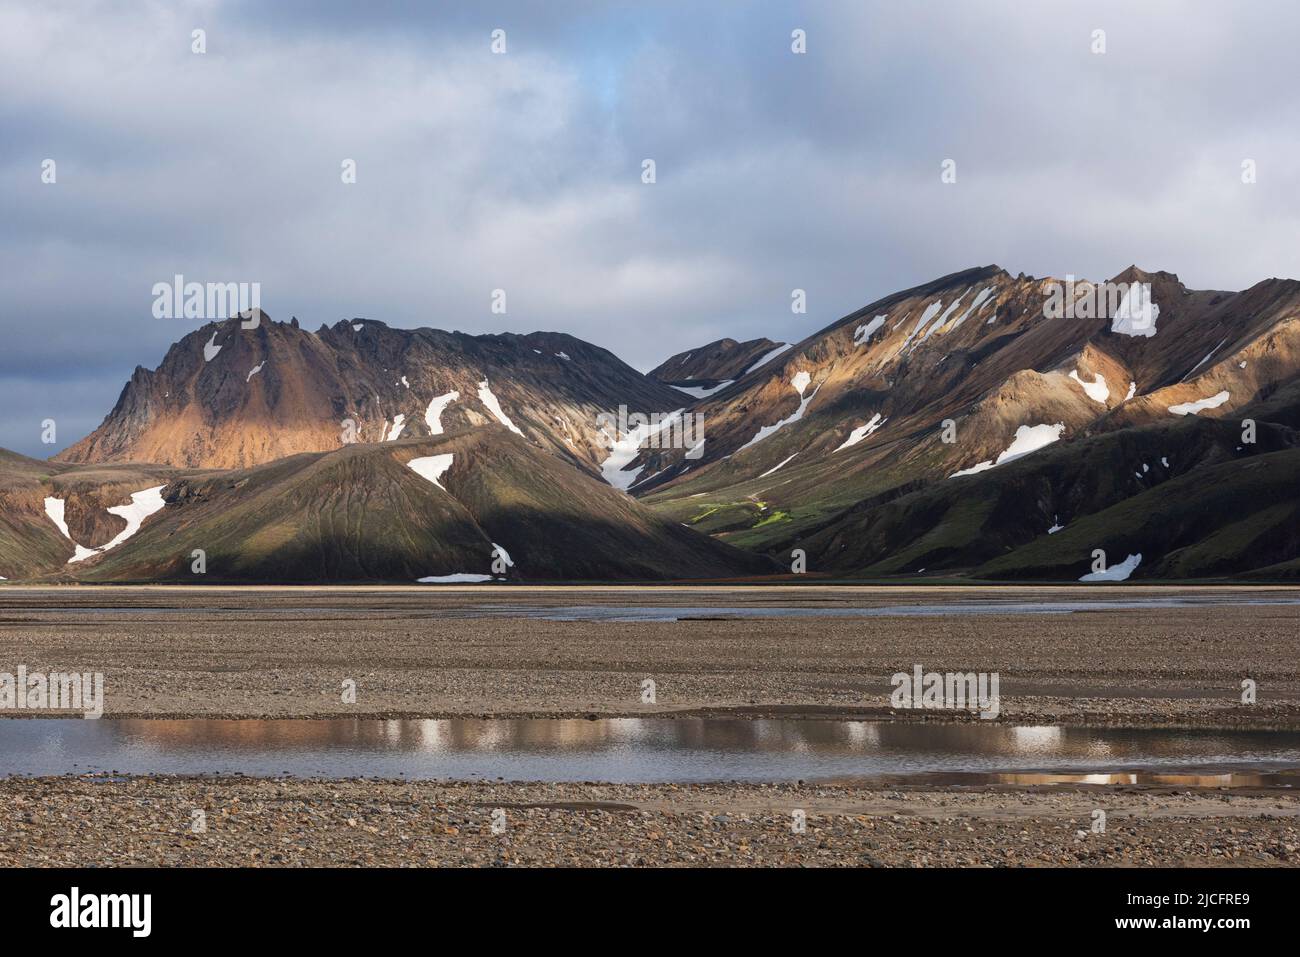 Laugavegur hiking trail is the most famous multi-day trekking tour in Iceland. Landscape shot from the area around Landmannalaugar, starting point of the long-distance hiking trail in the highlands of Iceland near the volcano Hekla. Reflection in the water. Stock Photo